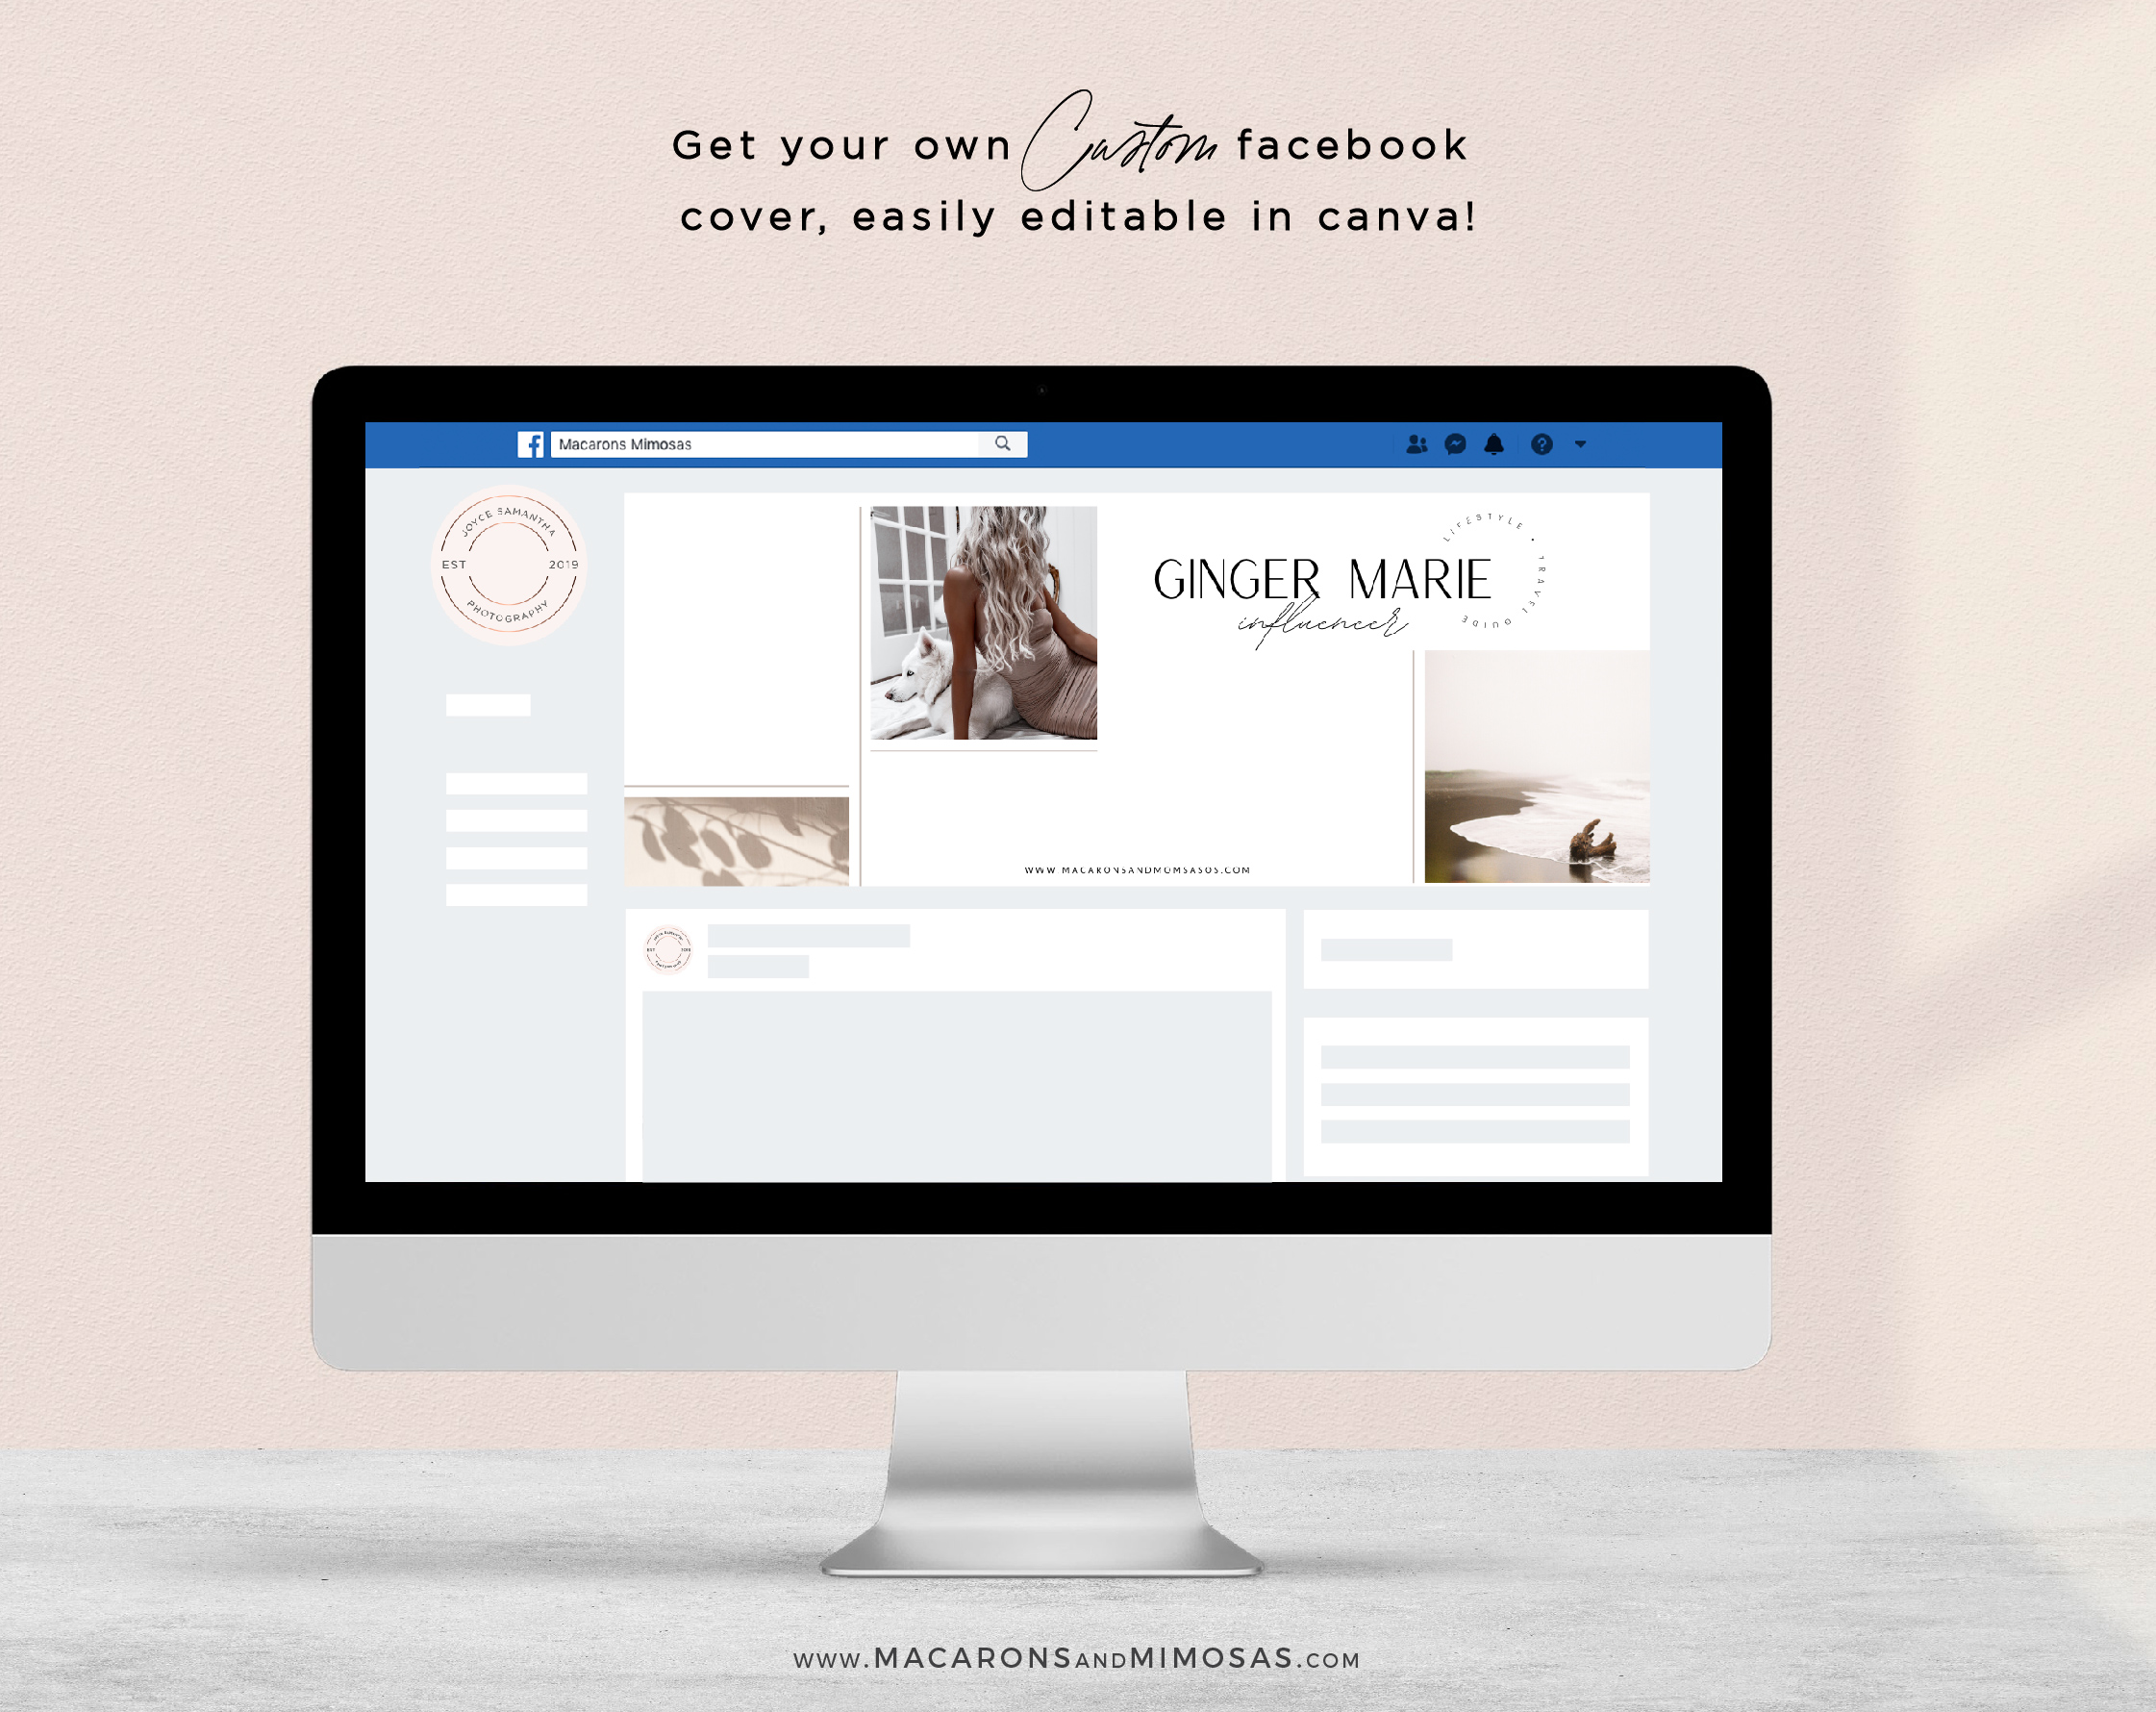 Facebook banner design fully editable in Canva. Customizable Facebook Banner Templates easy to edit for coaches, real estate, and more...